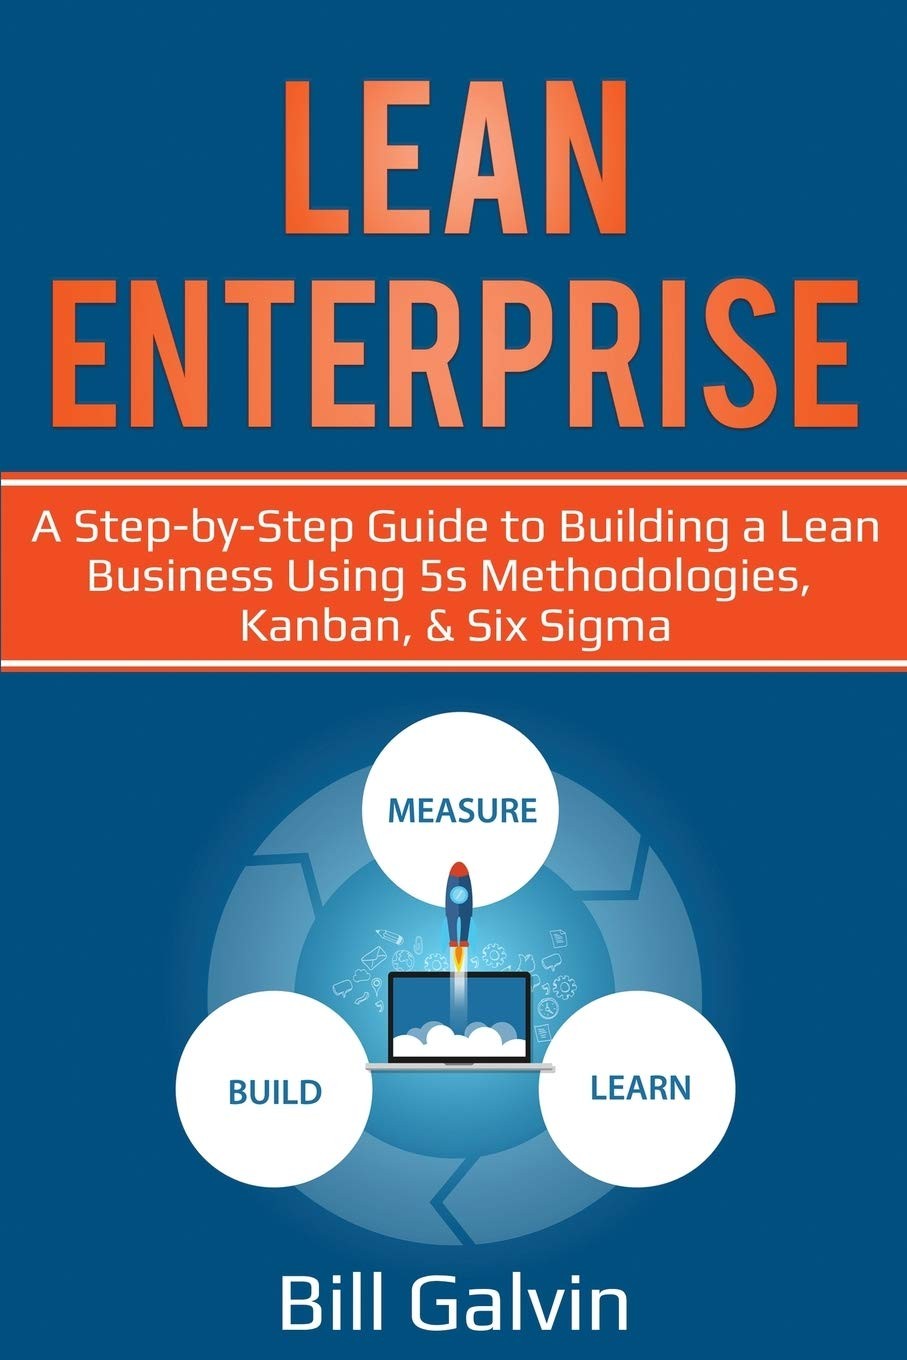 Lean Enterprise: A Step-By-Step Guide to Building a Lean Business Using 5s Methodologies, Kanban, & Six Sigma